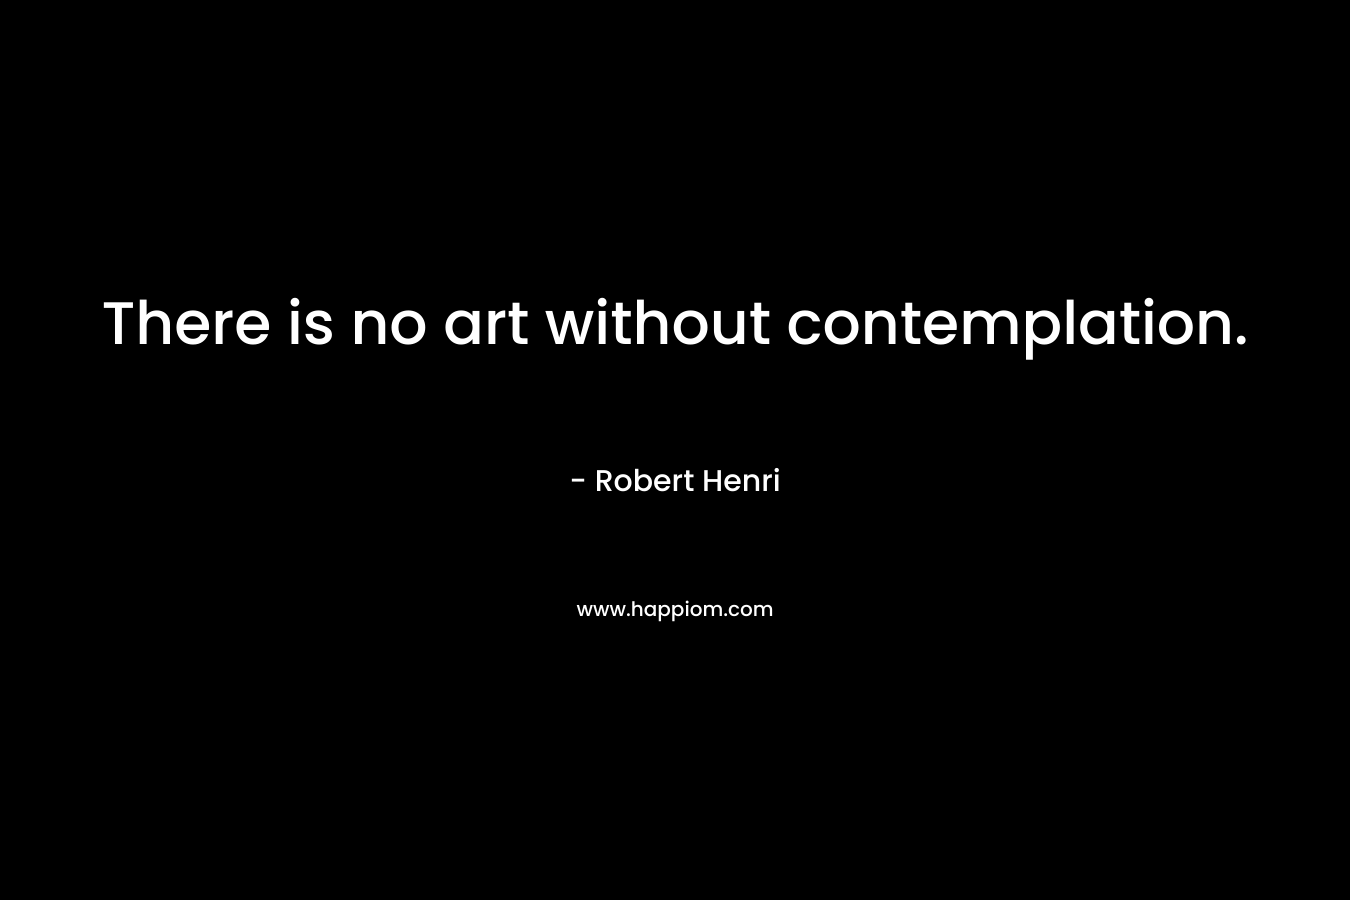 There is no art without contemplation.